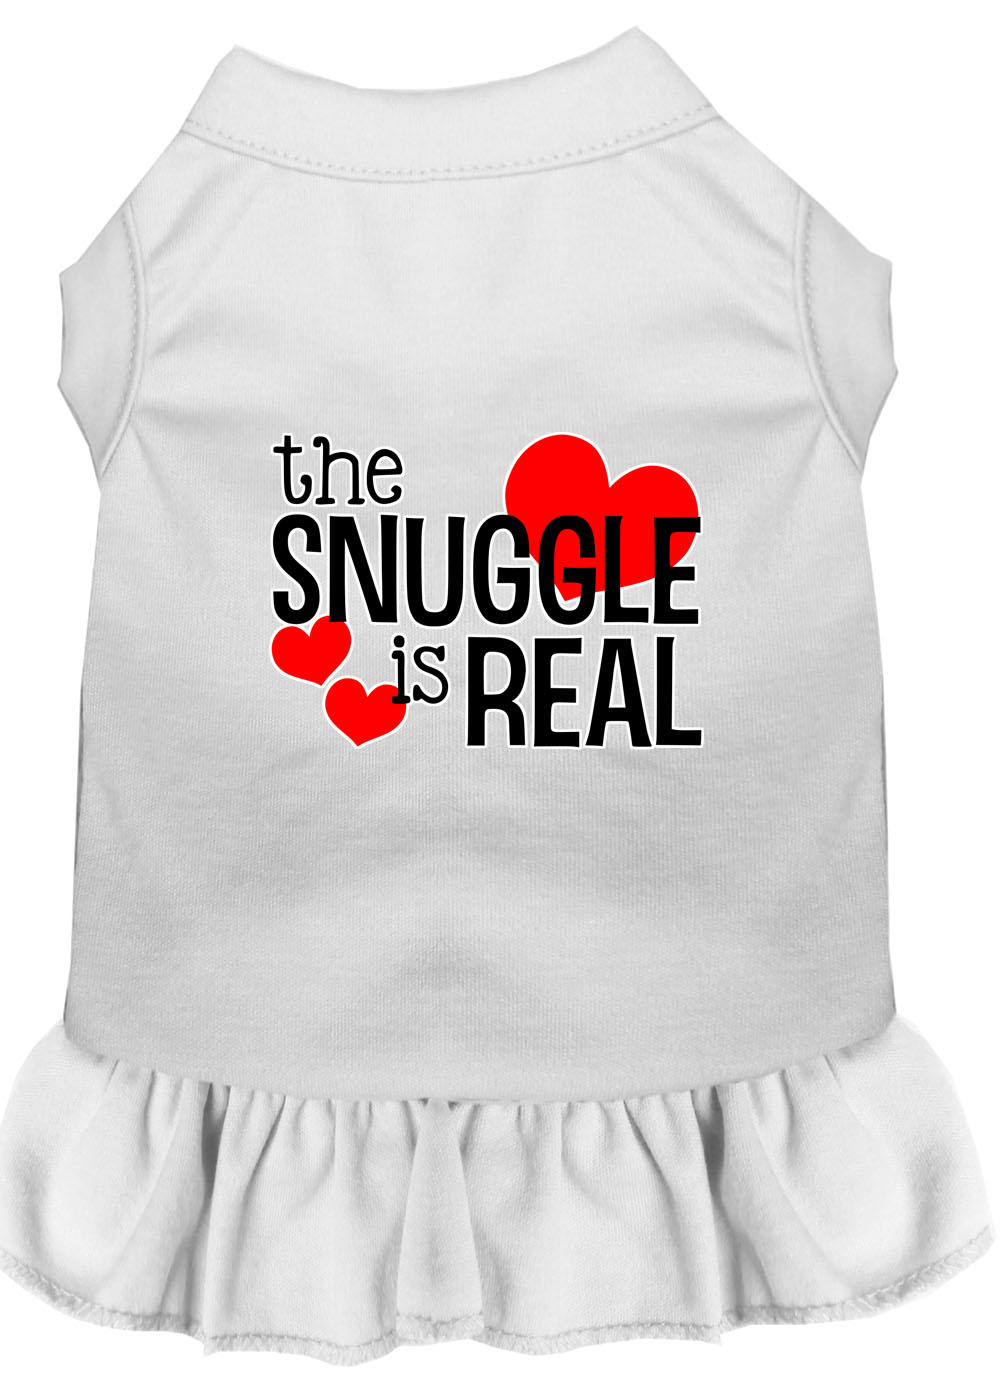 The Snuggle is Real Screen Print Dog Dress White XL